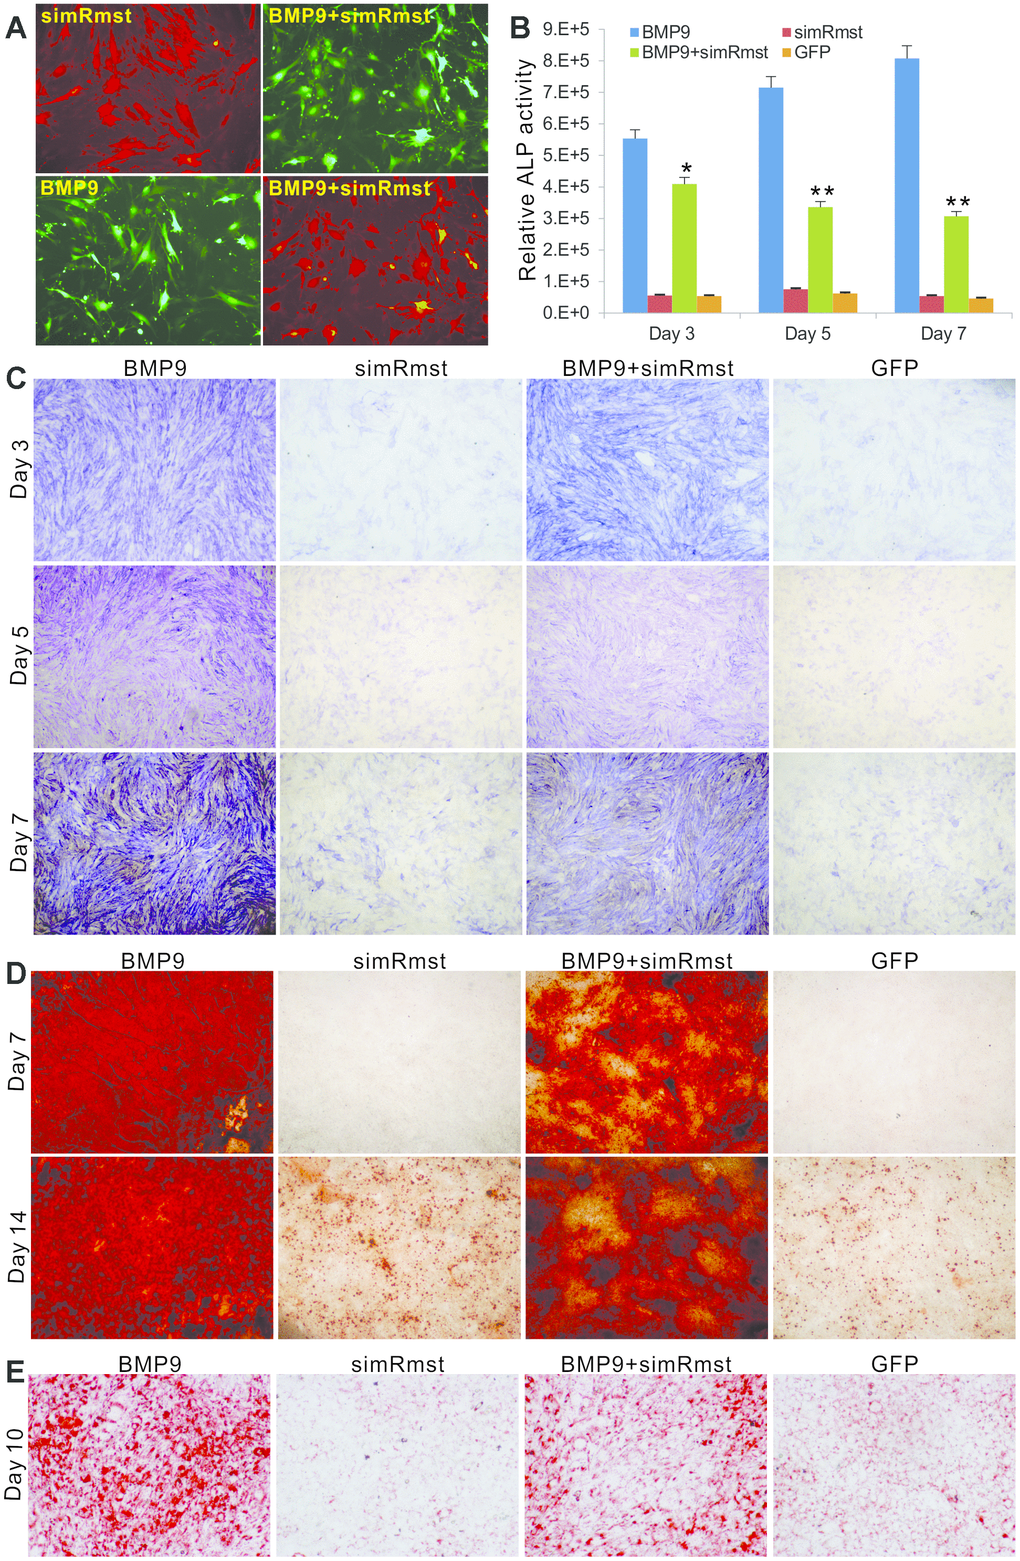 Knockdown of Rmst diminishes BMP9-induced osteogenic and adipogenic differentiation of MSCs. (A) AdR-simRmst was shown to infect the iMADs with high efficiency alone or co-infect with Ad-BMP9. Images were recorded at 48h post infection. Representative images are shown. (B and C) Downregulation of Rmst reduces BMP9-induced ALP activity in iMADs. Subconfluent iMADs were infected with Ad-BMP9, Ad-GFP, and/or AdR-simRmst. ALP activity was quantitatively determined at 3, 5 and 7 days after infection (B) or stained histochemically (C). Assays were done in triplicate. “*” pD) Silencing Rmst leads to reduced matrix mineralization induced by BMP9 in iMADs. Subconfluent iMADs were infected with Ad-BMP9, Ad-GFP, and/or AdR-simRmst, and cultured in mineralization medium. At day 7 and day 14, the infected cells were fixed and subjected to Alizarin Red S staining. Each assay condition was done in triplicate. Representative microscope images are shown. (E) Downregulation of Rmst reduces BMP9-induced adipogenesis in iMADs. Subconfluent iMADs were infected with Ad-BMP9, Ad-GFP, and/or Ad-simRmst. At 10 days post infection, the cells were fixed and subjected to Oil Red O staining. Each assay condition was done in triplicate. Representative microscopic images are shown.